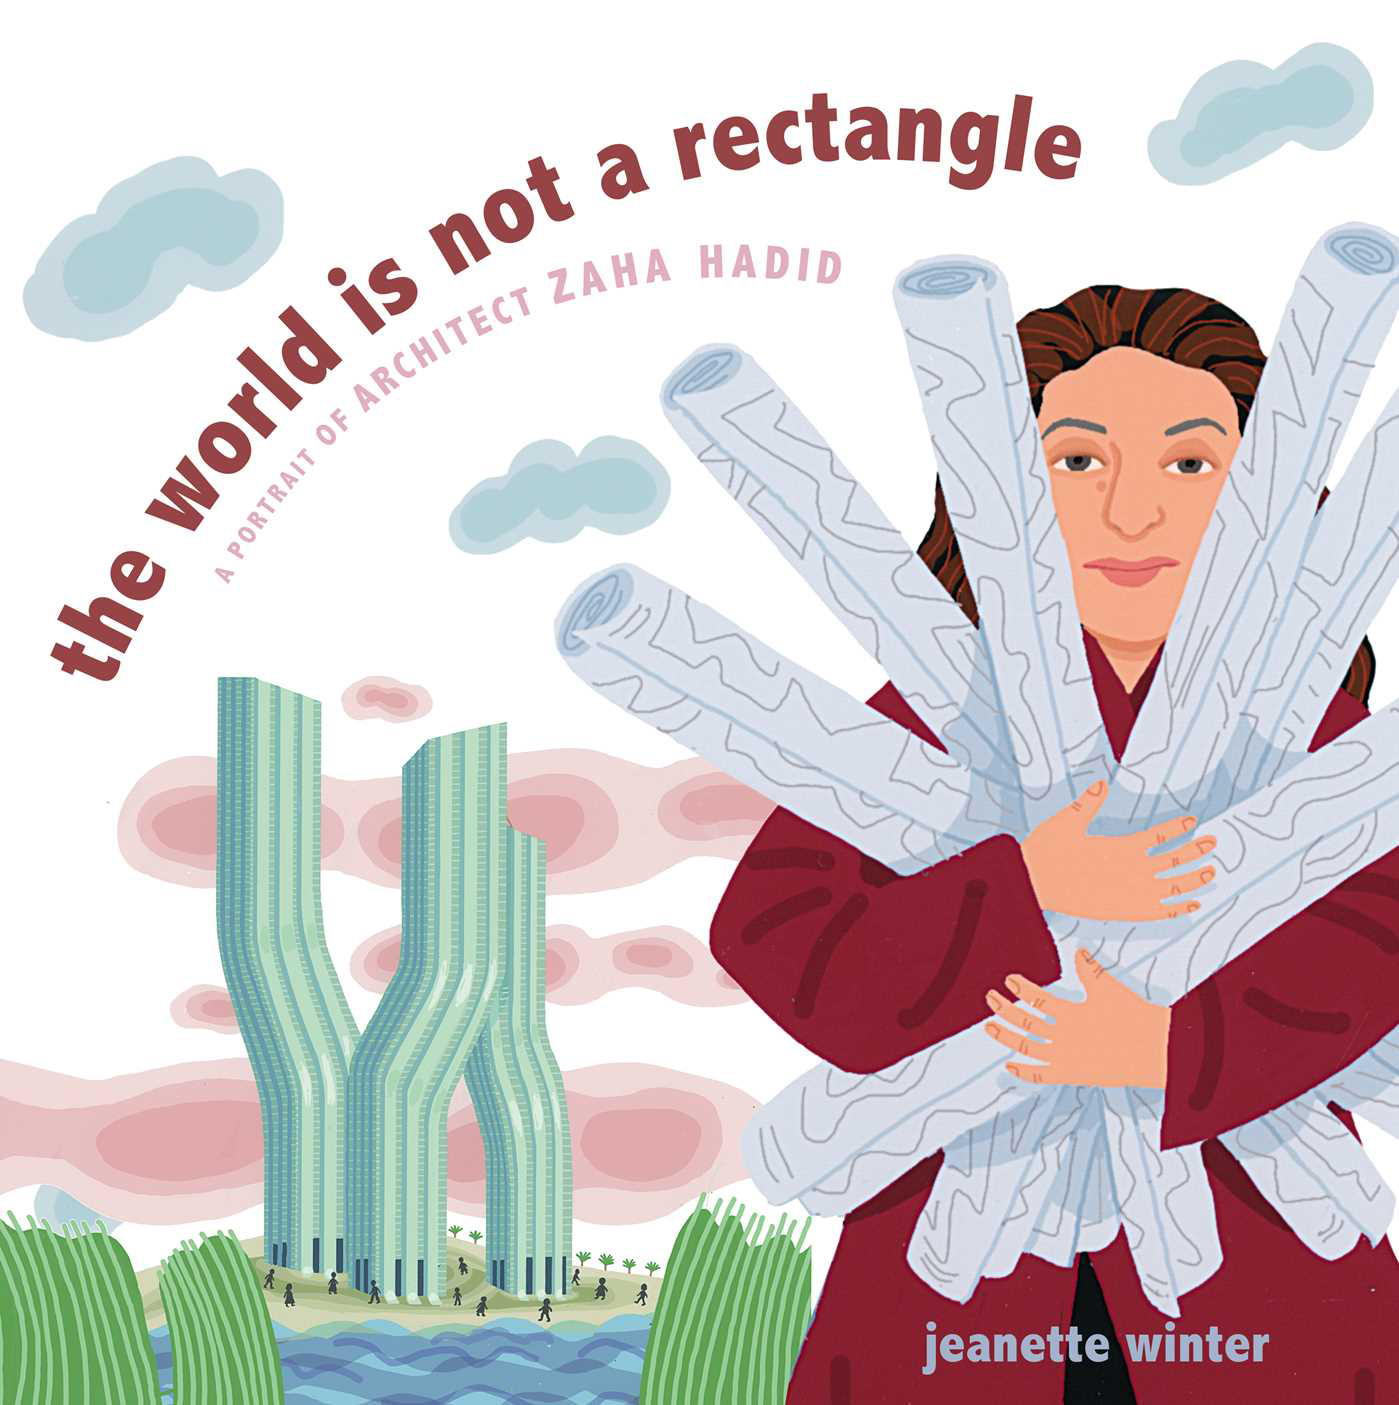 Book cover for "The World Is Not A Rectangle" depicting a woman holding a bunch of maps